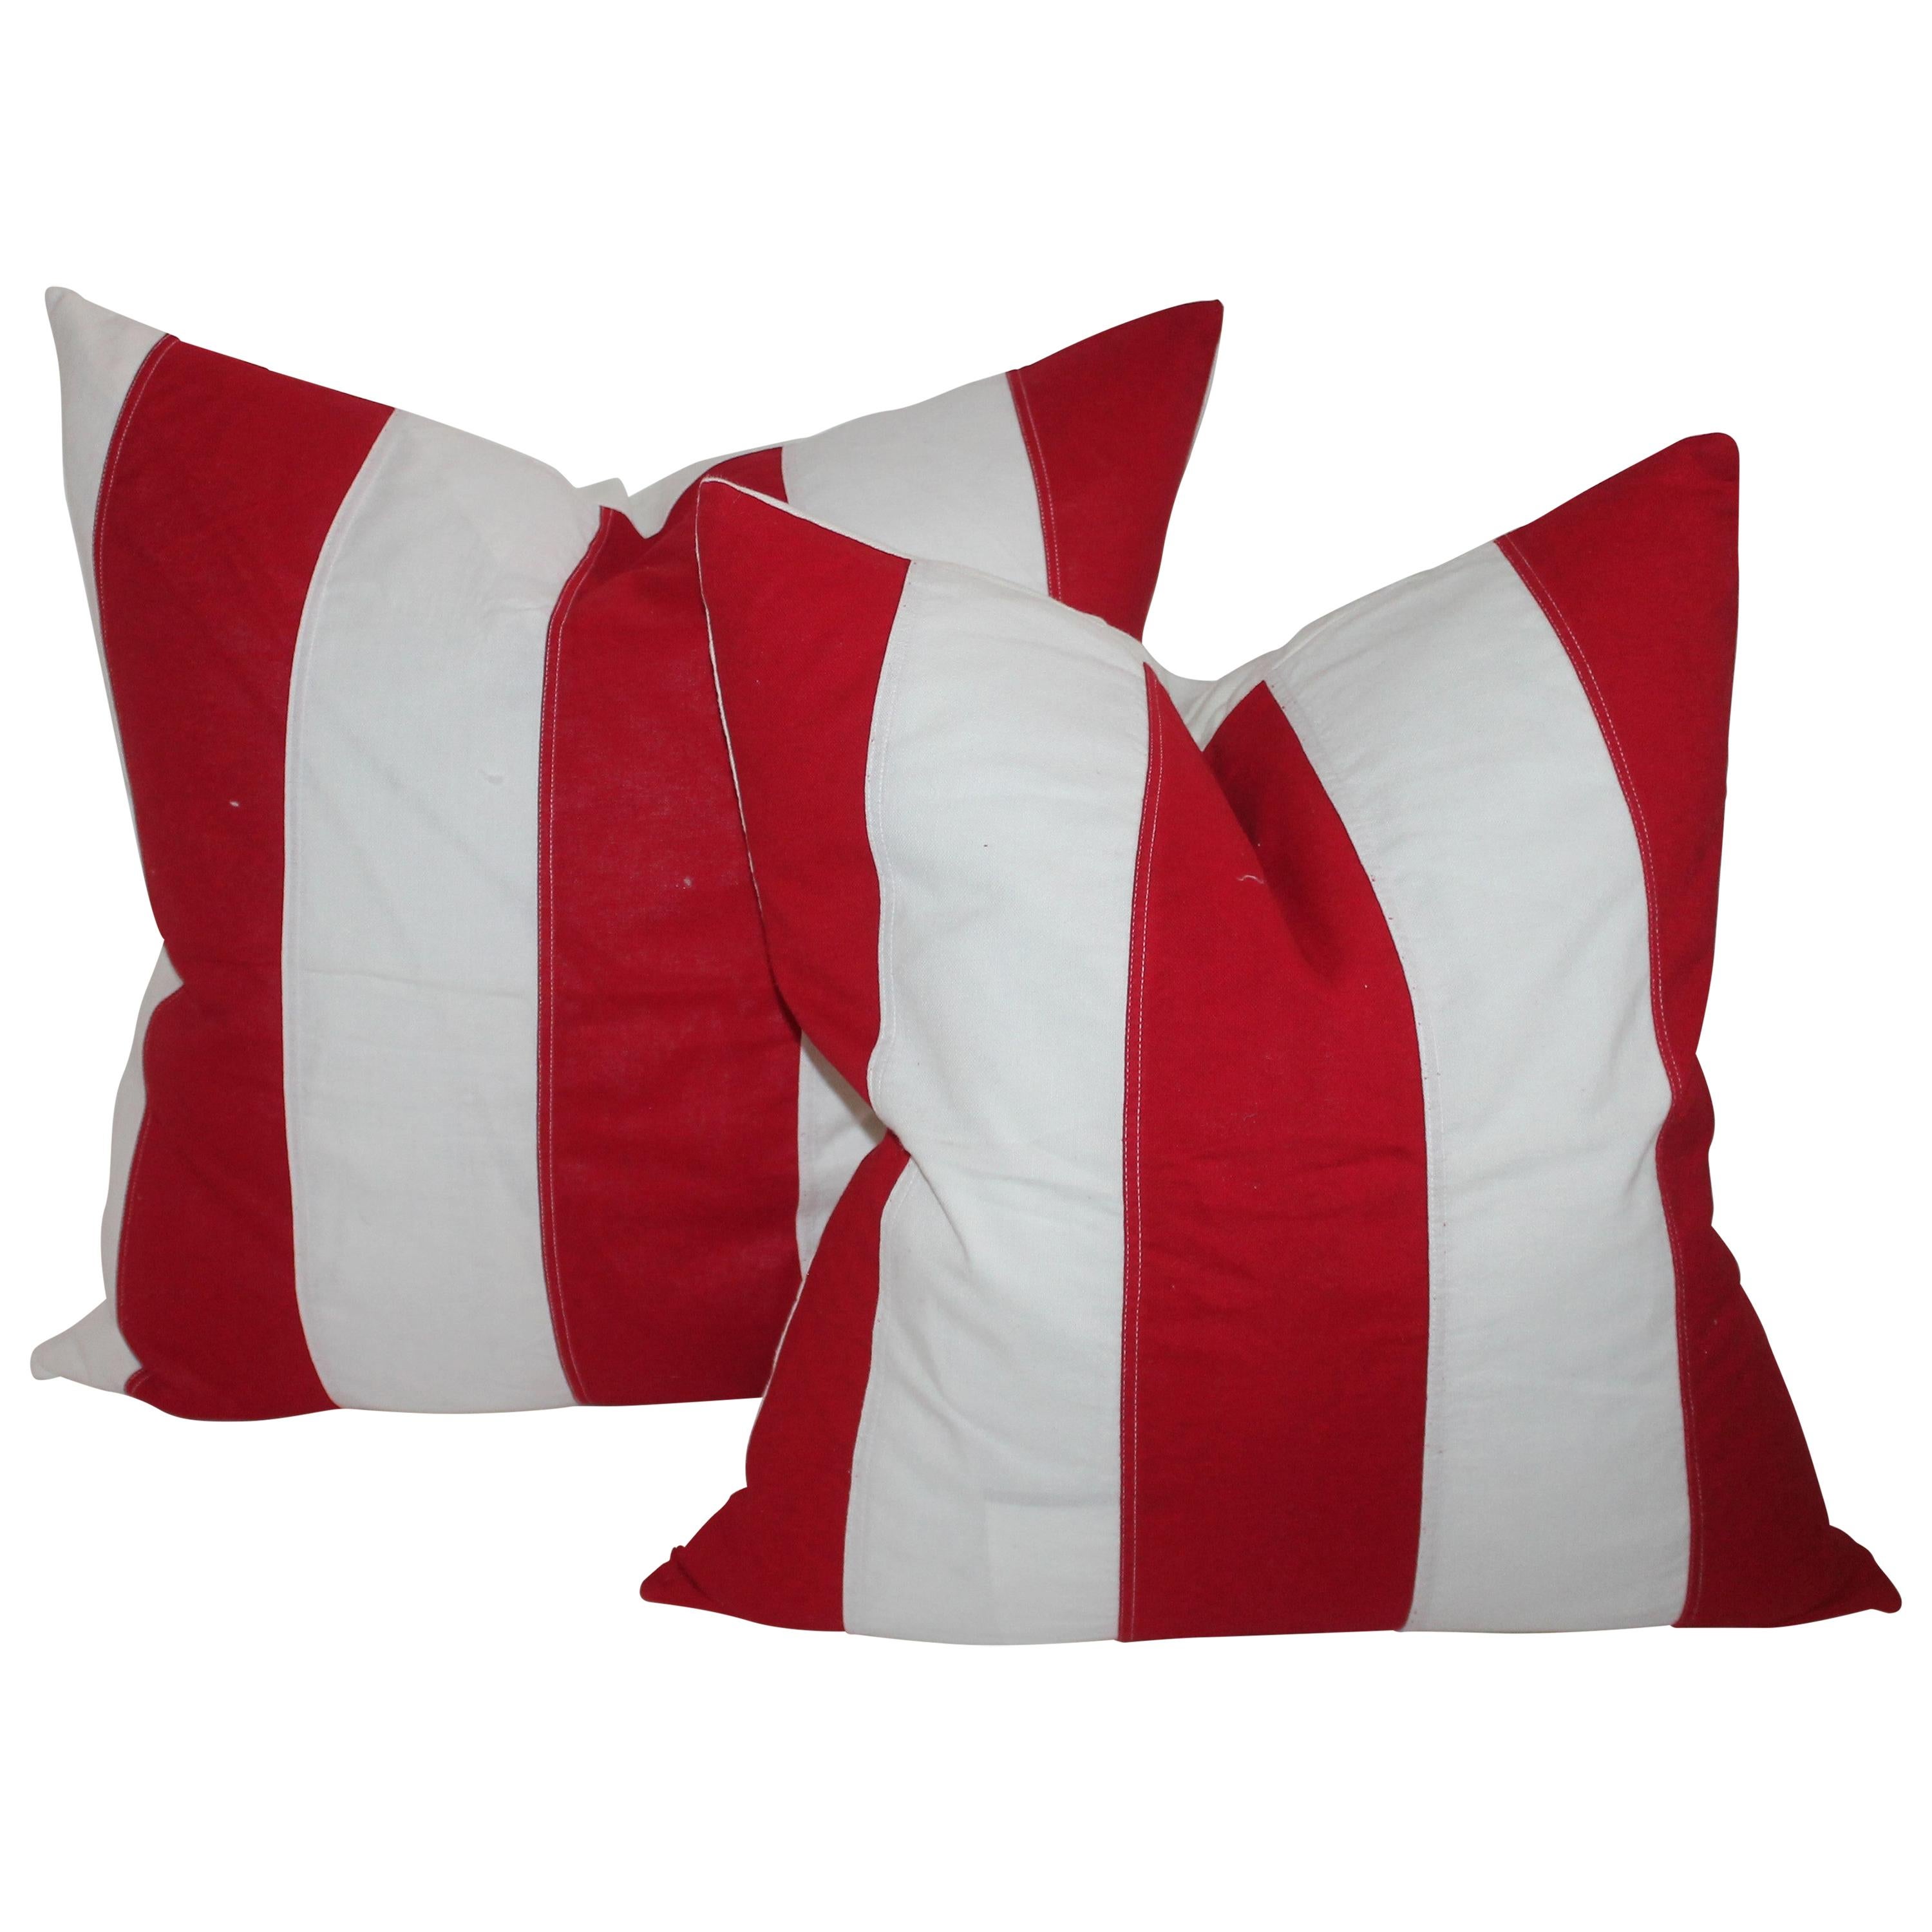 Vintage Striped Red and White Flag Pillows